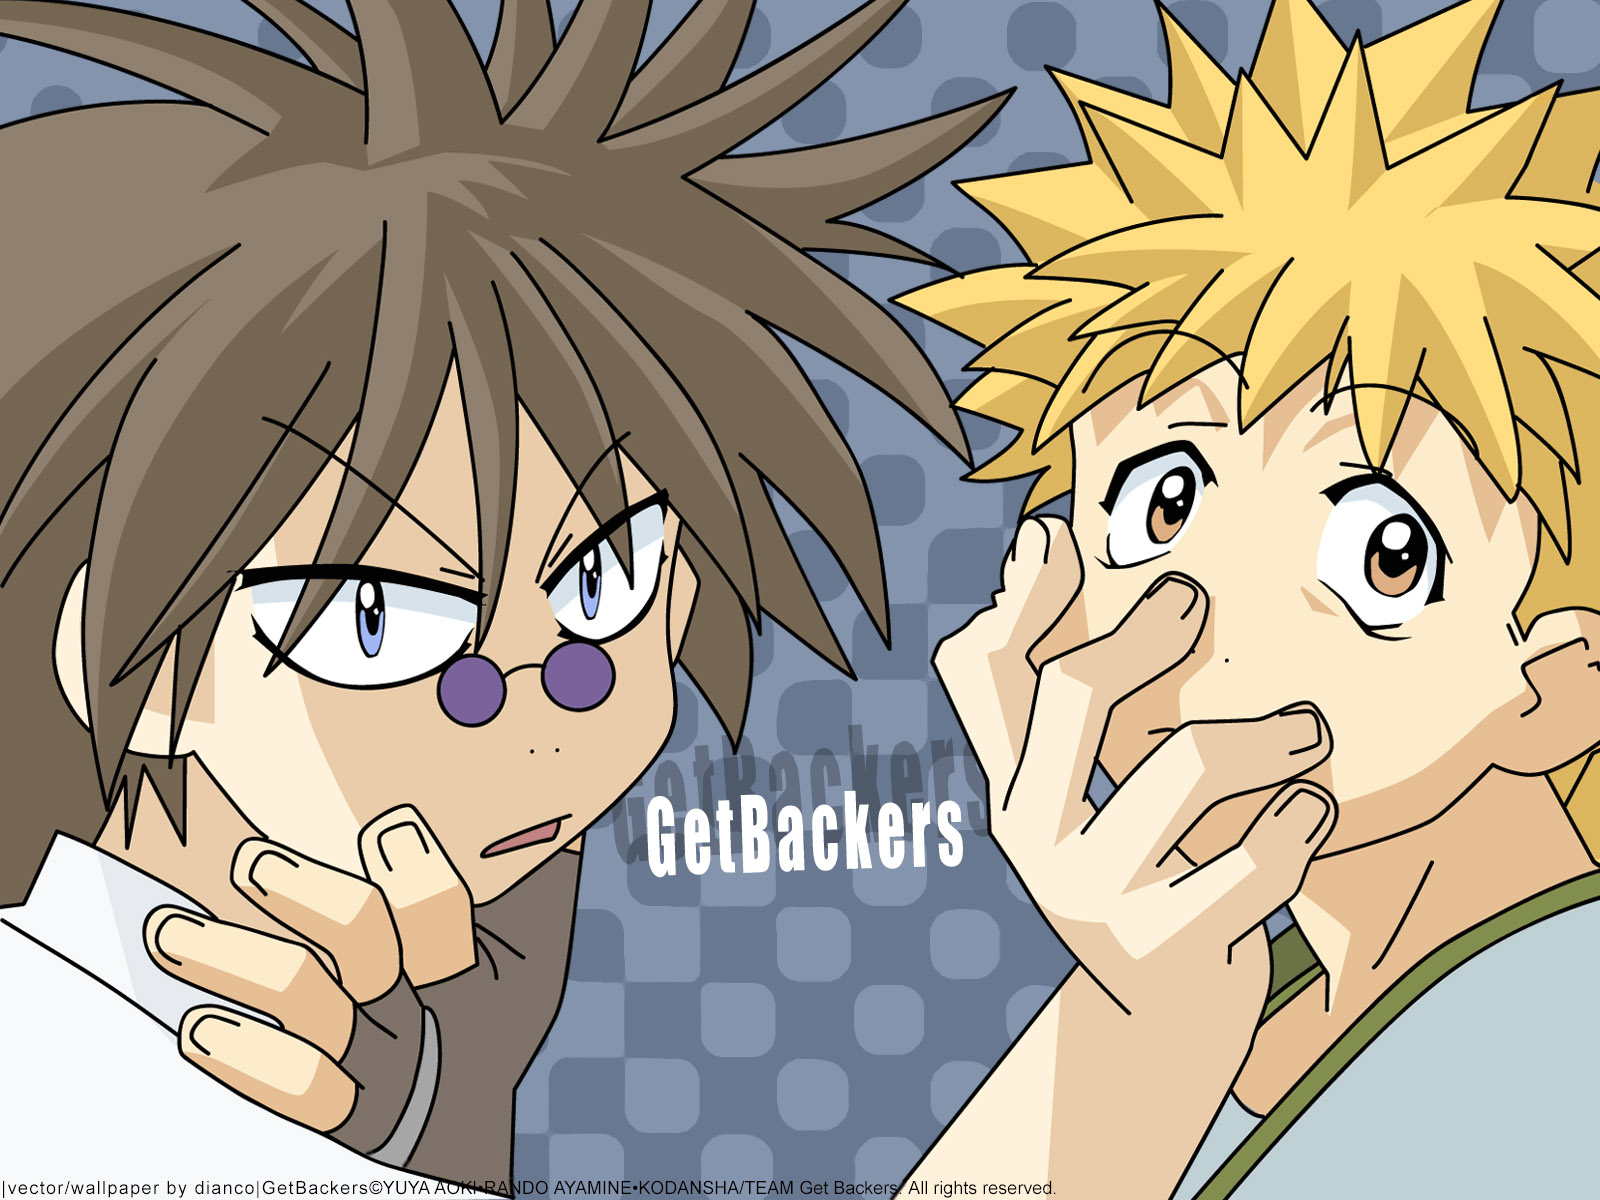 Anime wallpaper featuring characters from the GetBackers series.